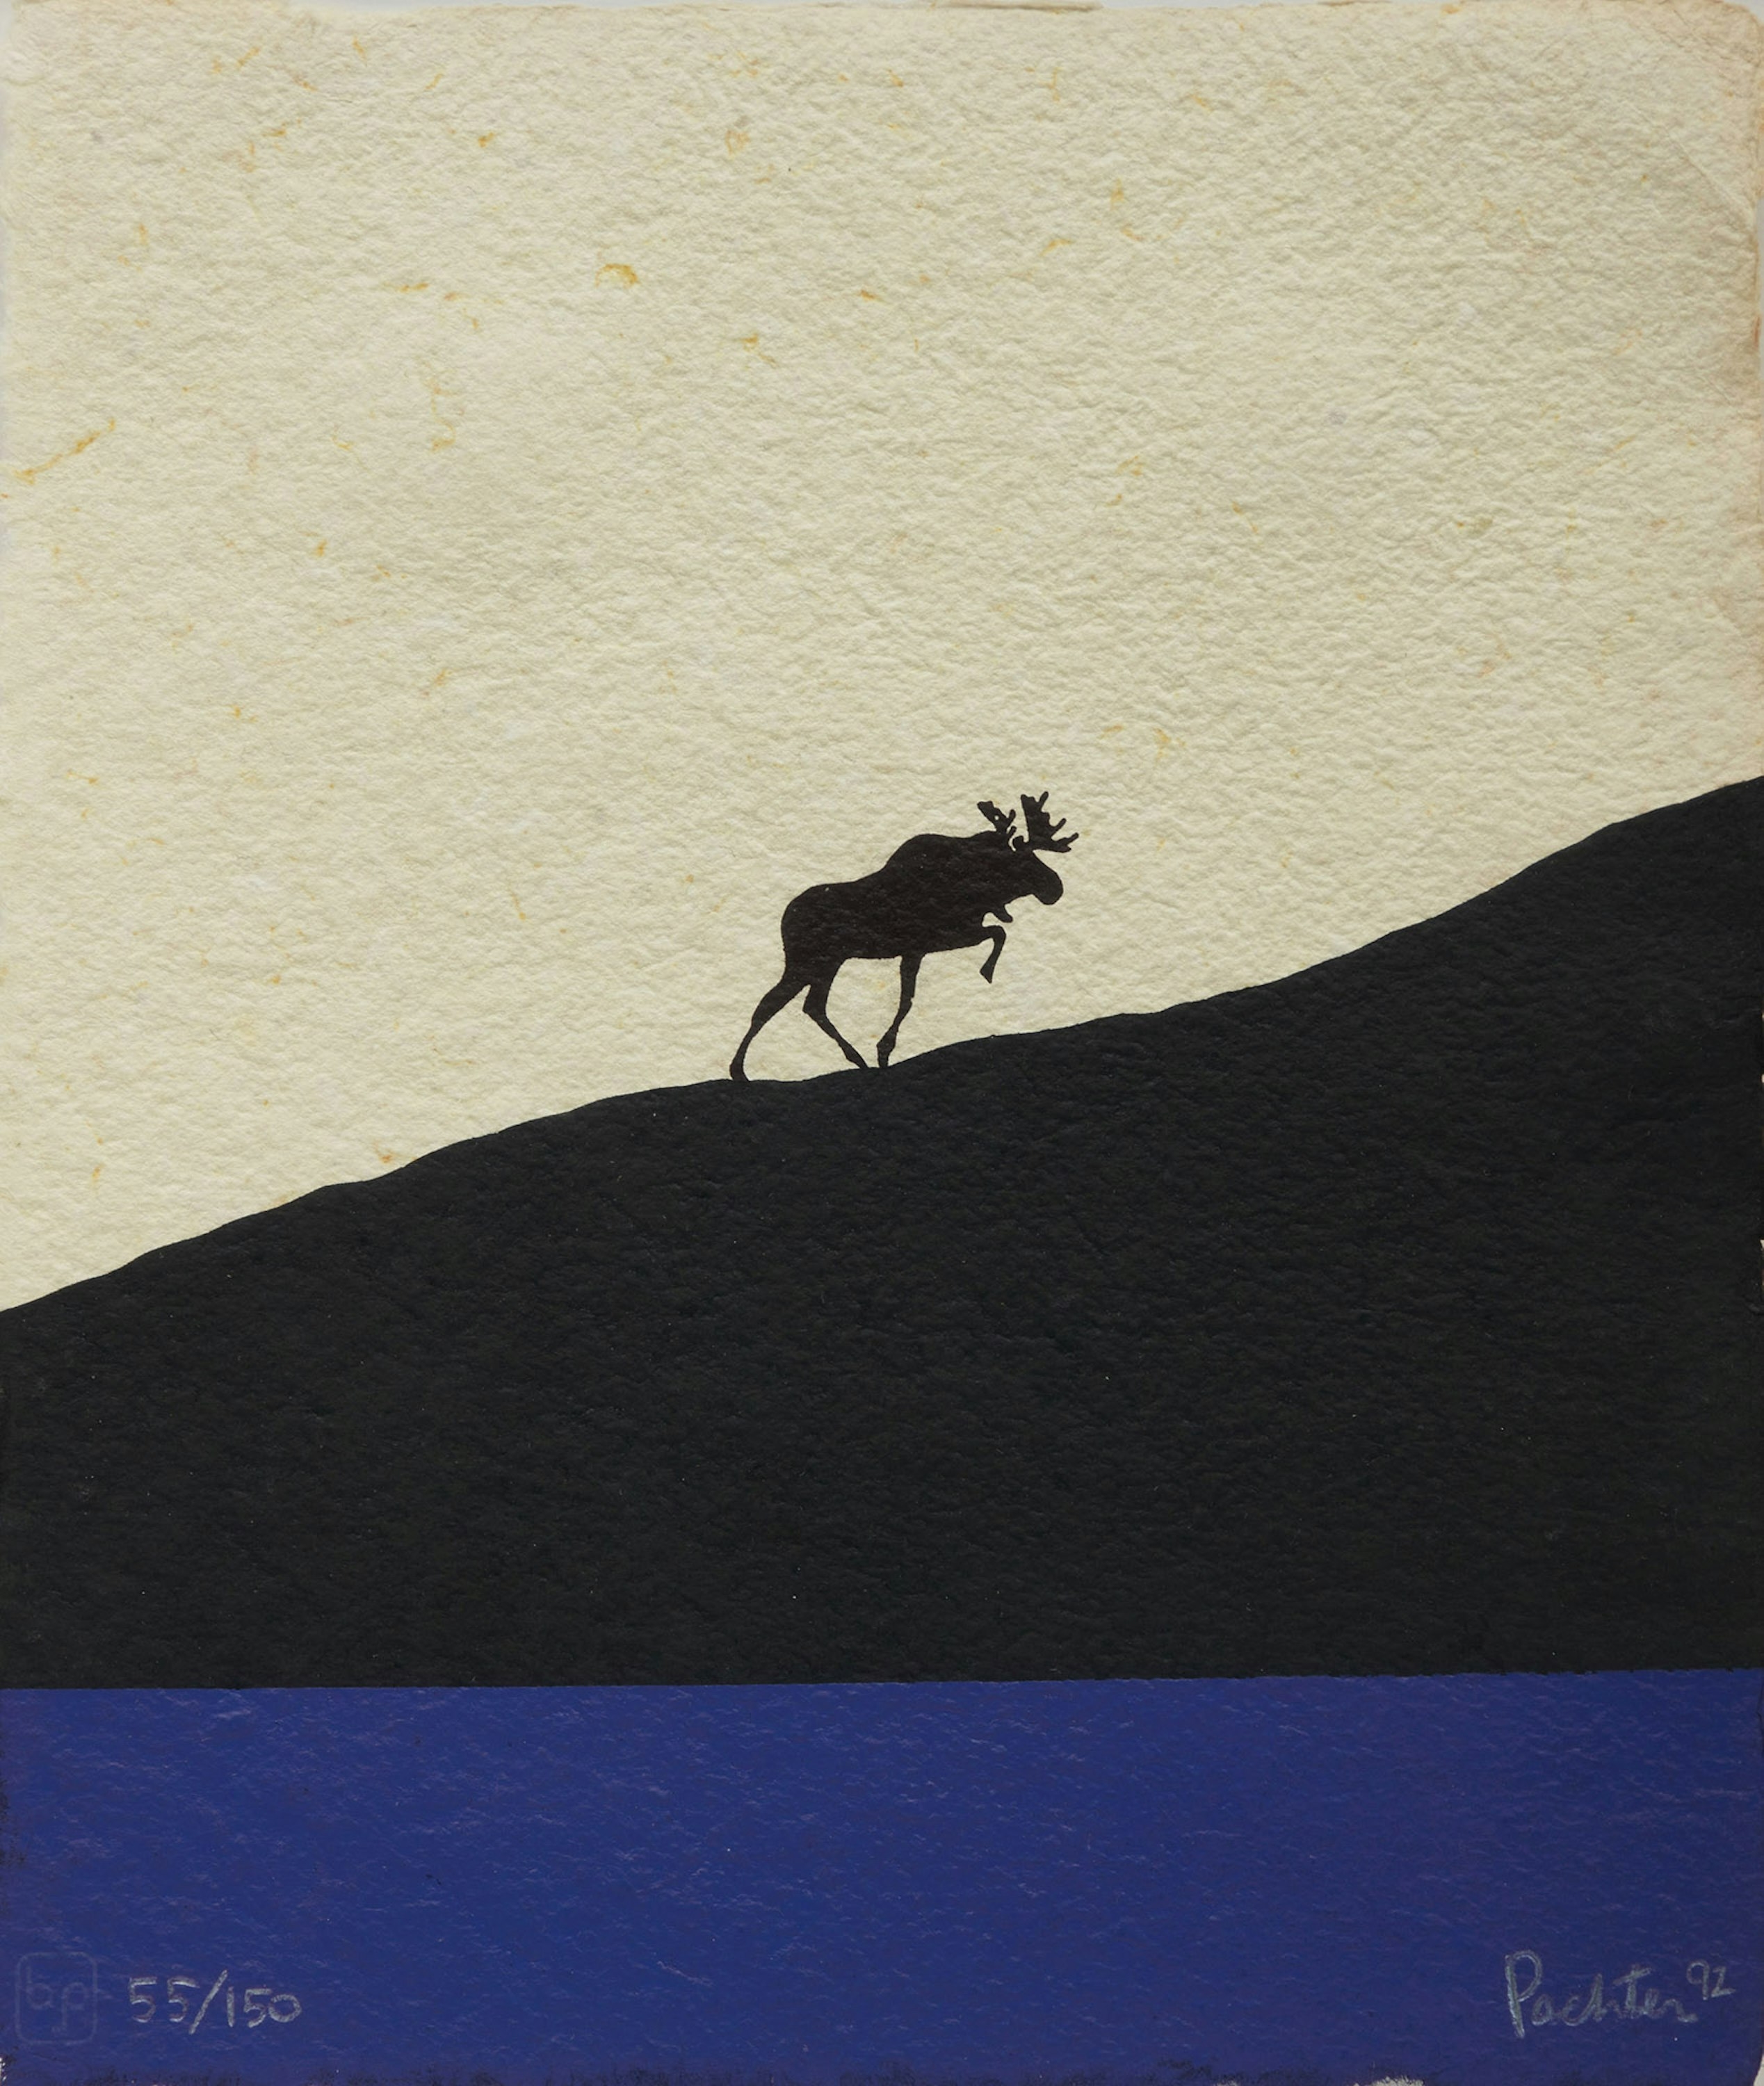 The Ascent - Charles Pachter